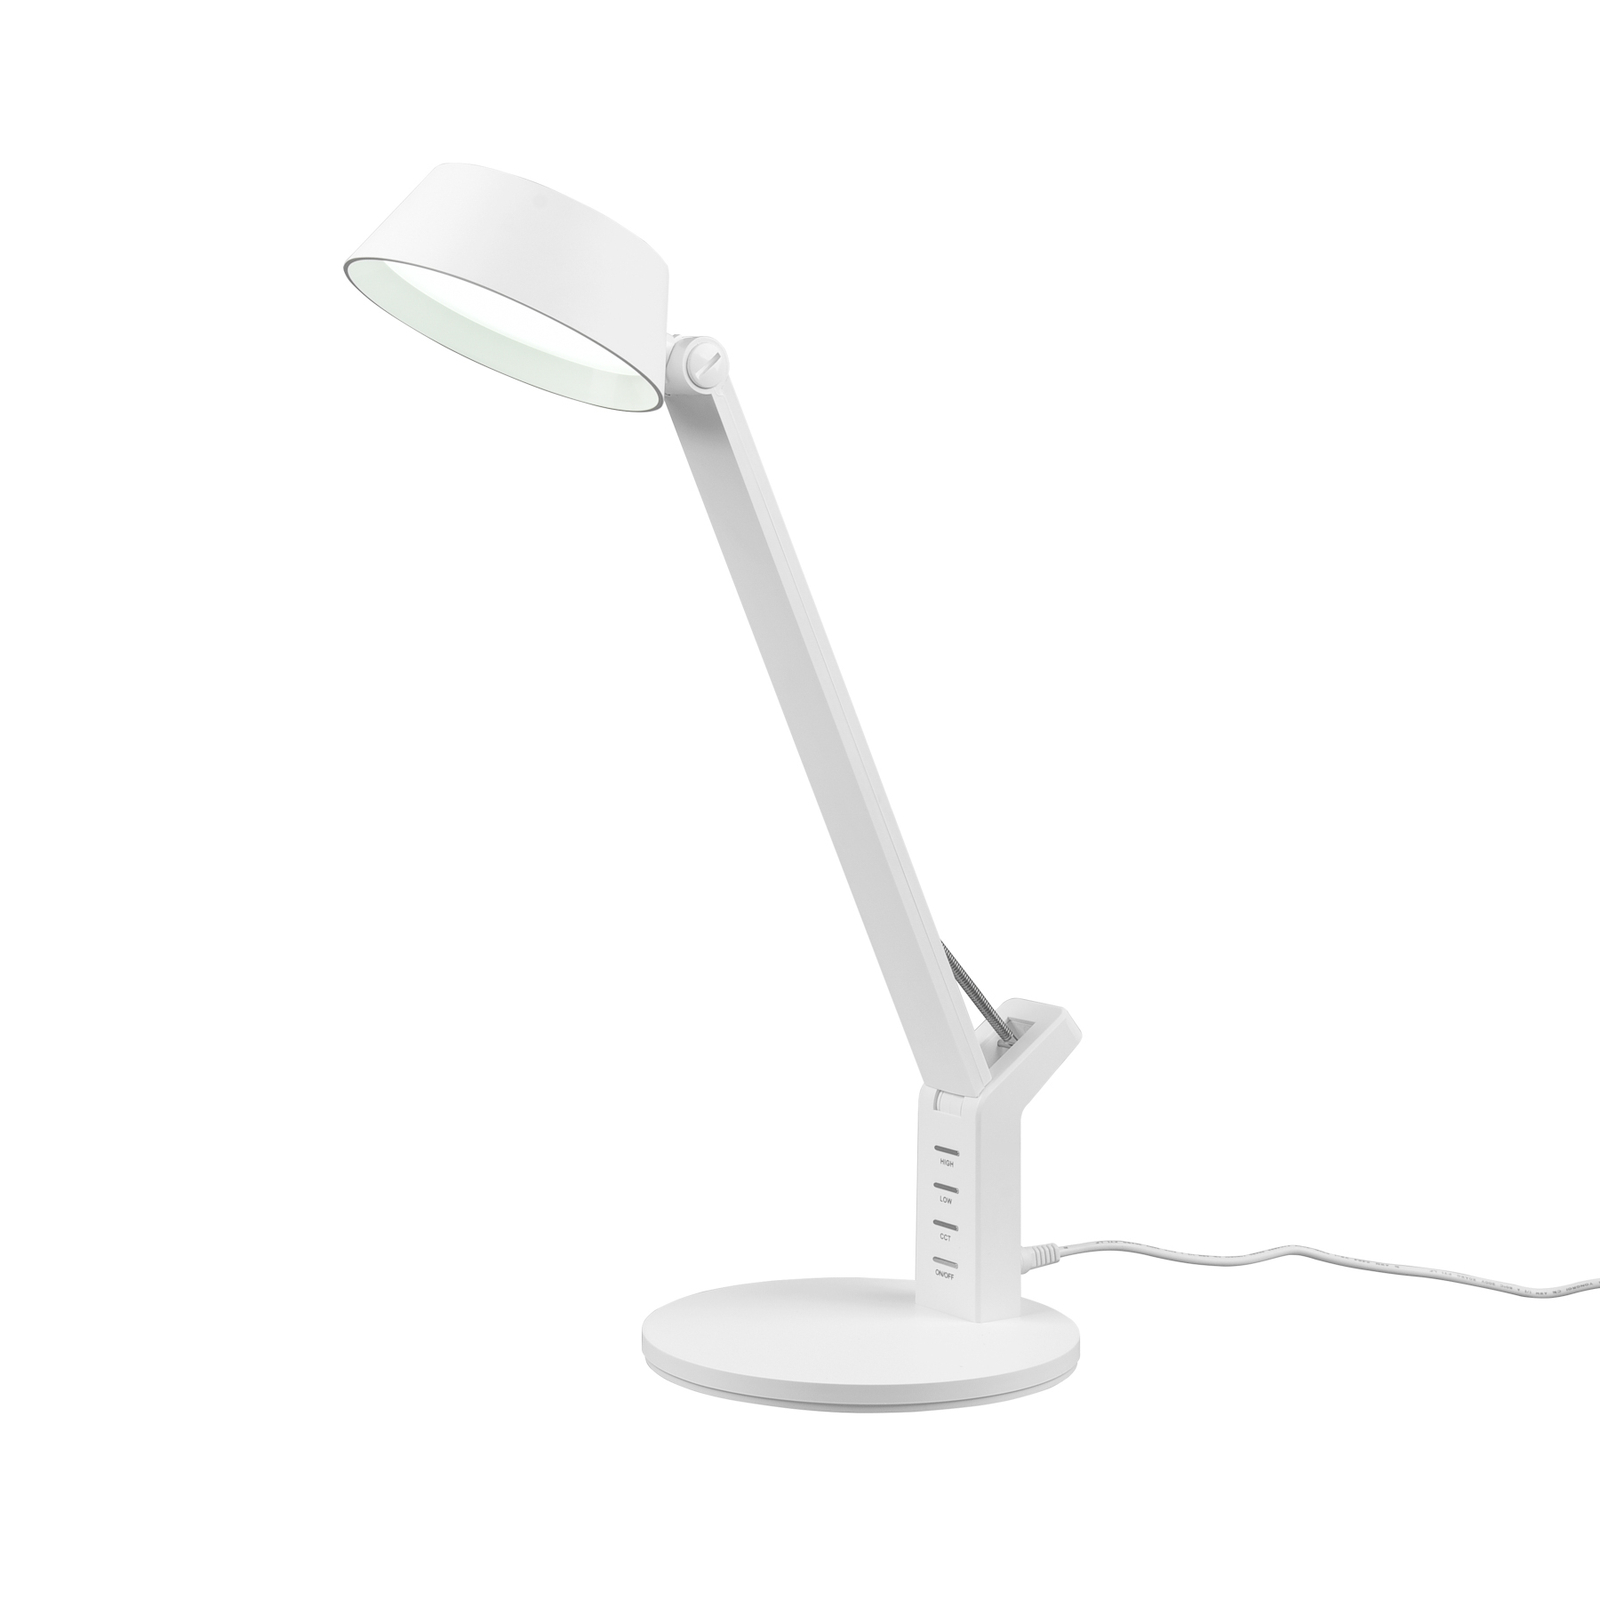 Lampe à poser LED Ava dimmable, blanche